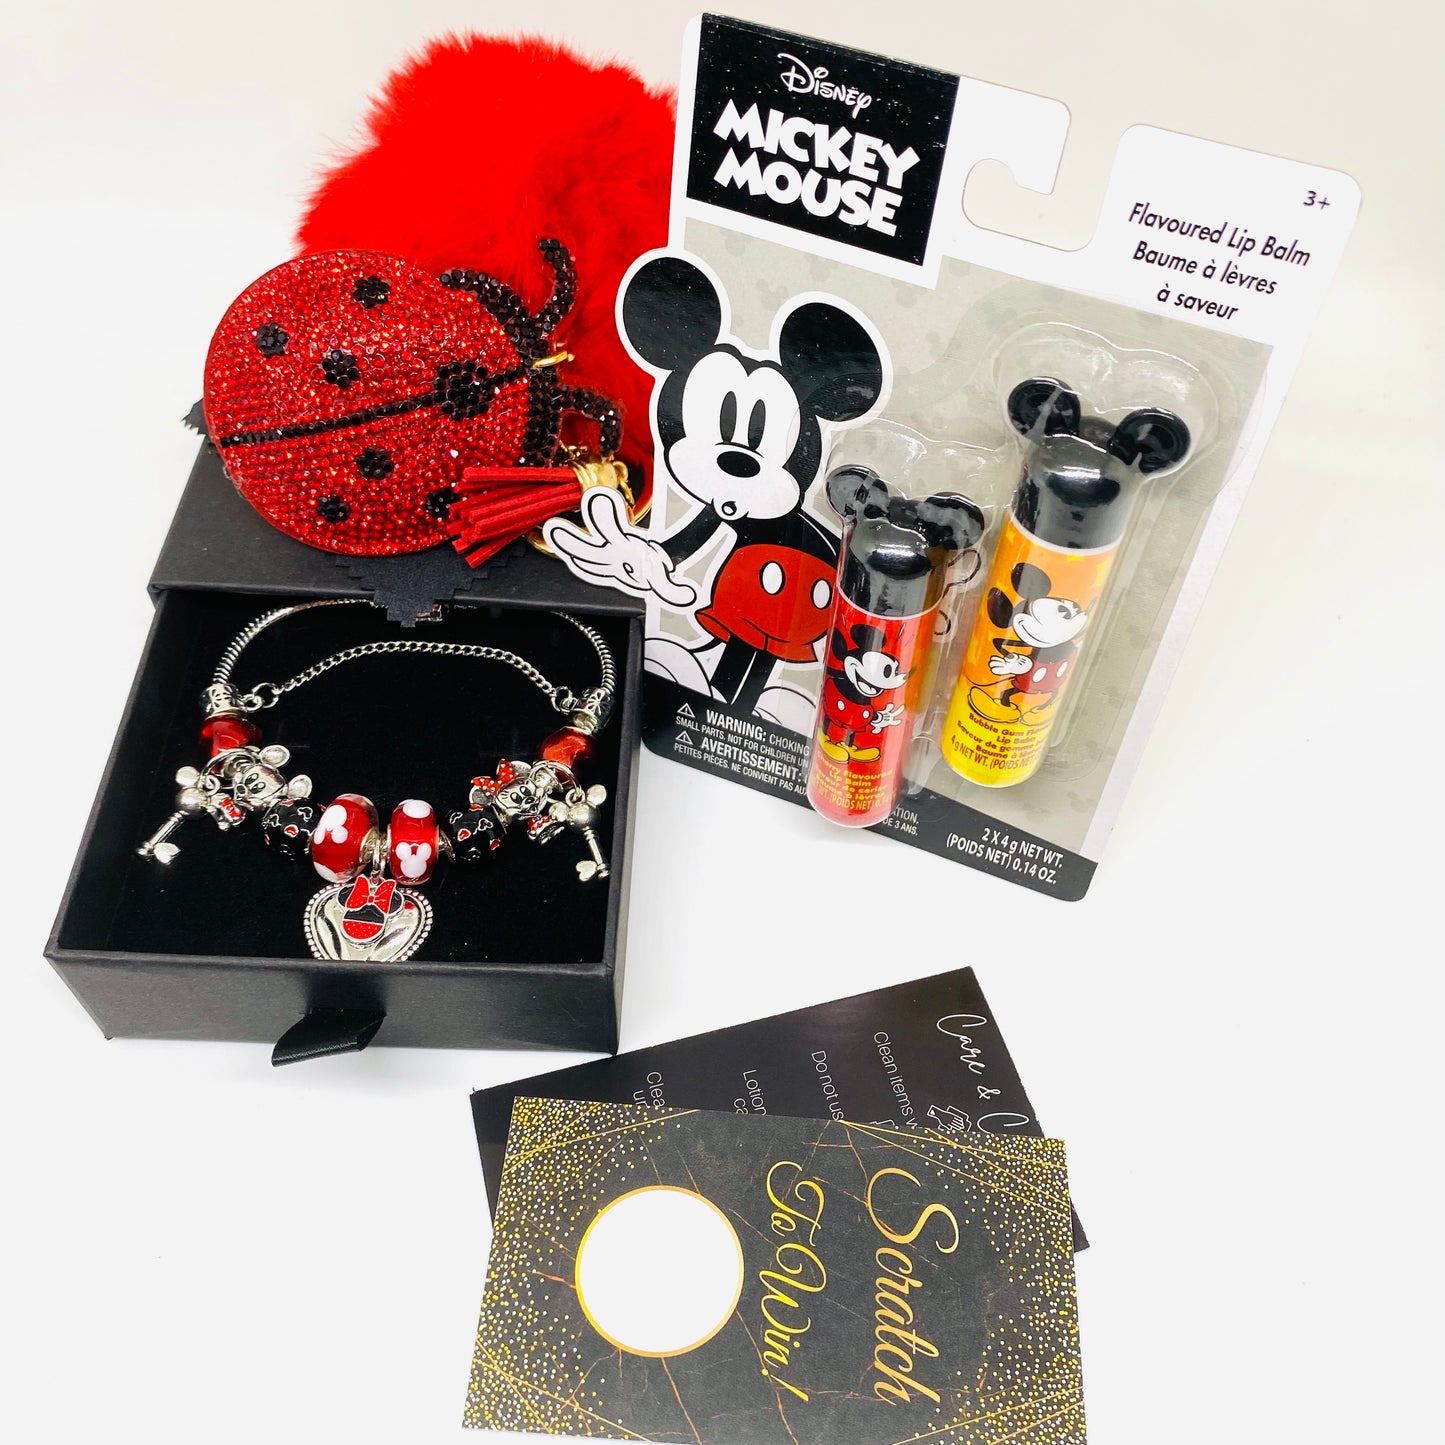 2024 Disney & Friends Vintage Mickey Mouse Silver Charm Bracelet Bundle Includes a matching Duo Disney Chapstick Bundle In The Flavor Bubble Gum & Cherry & One Red and Black sequence Lady Bug Sparkly Gold Keychain With fur Ball Attachment.